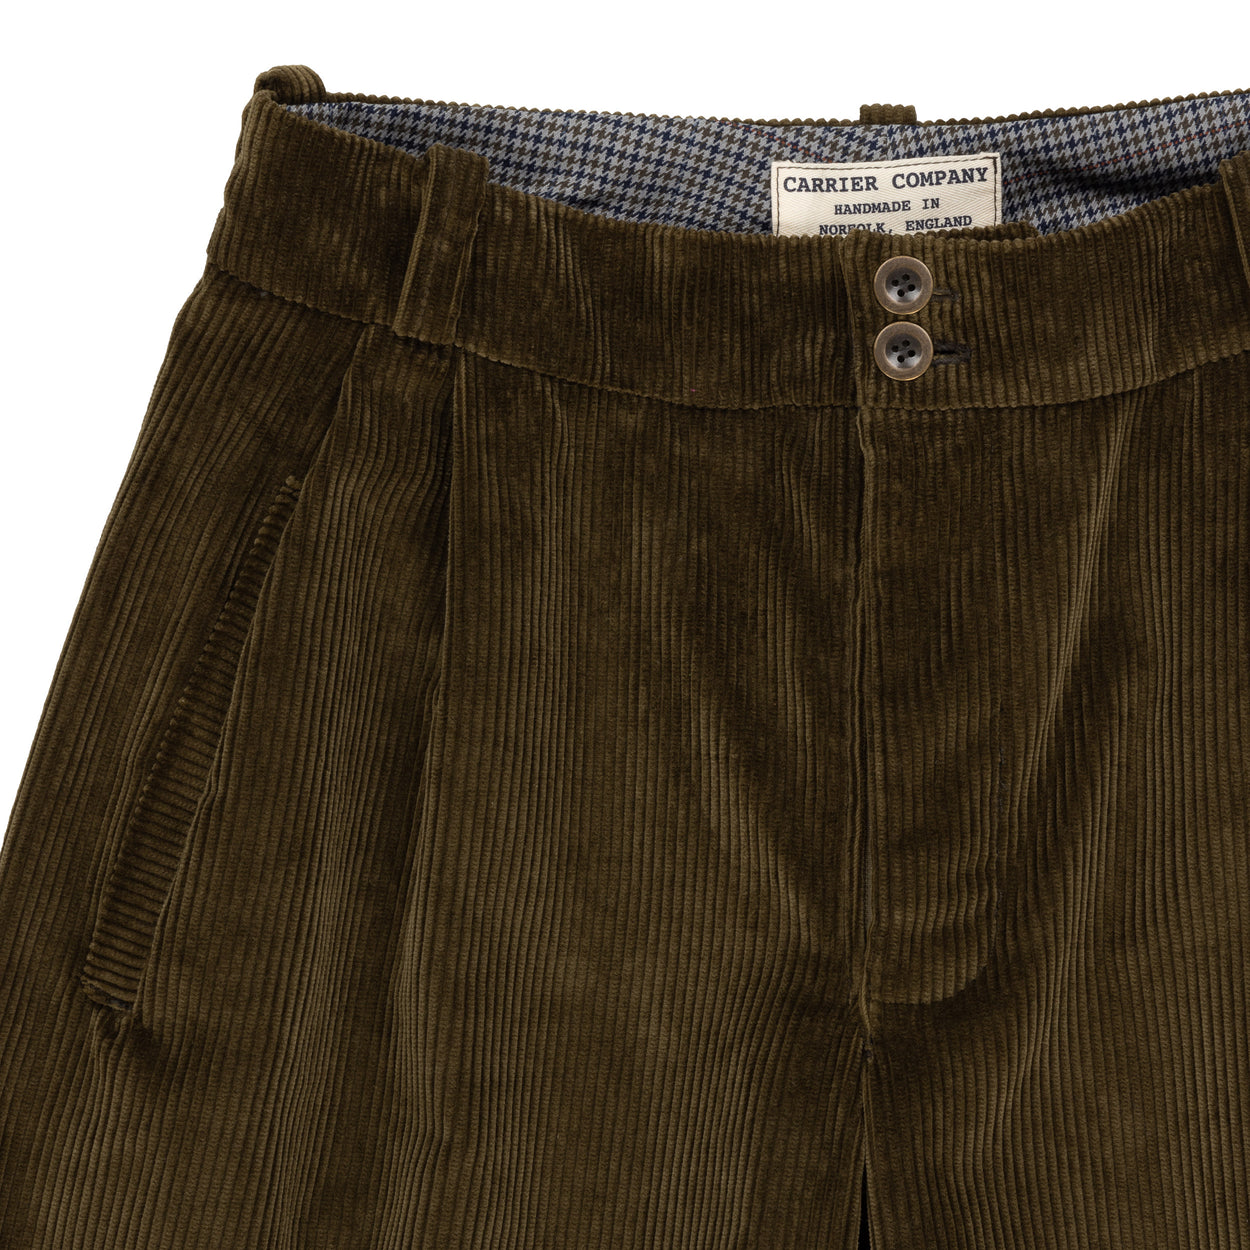 Dutch Trouser in Olive Corduroy – Carrier Company